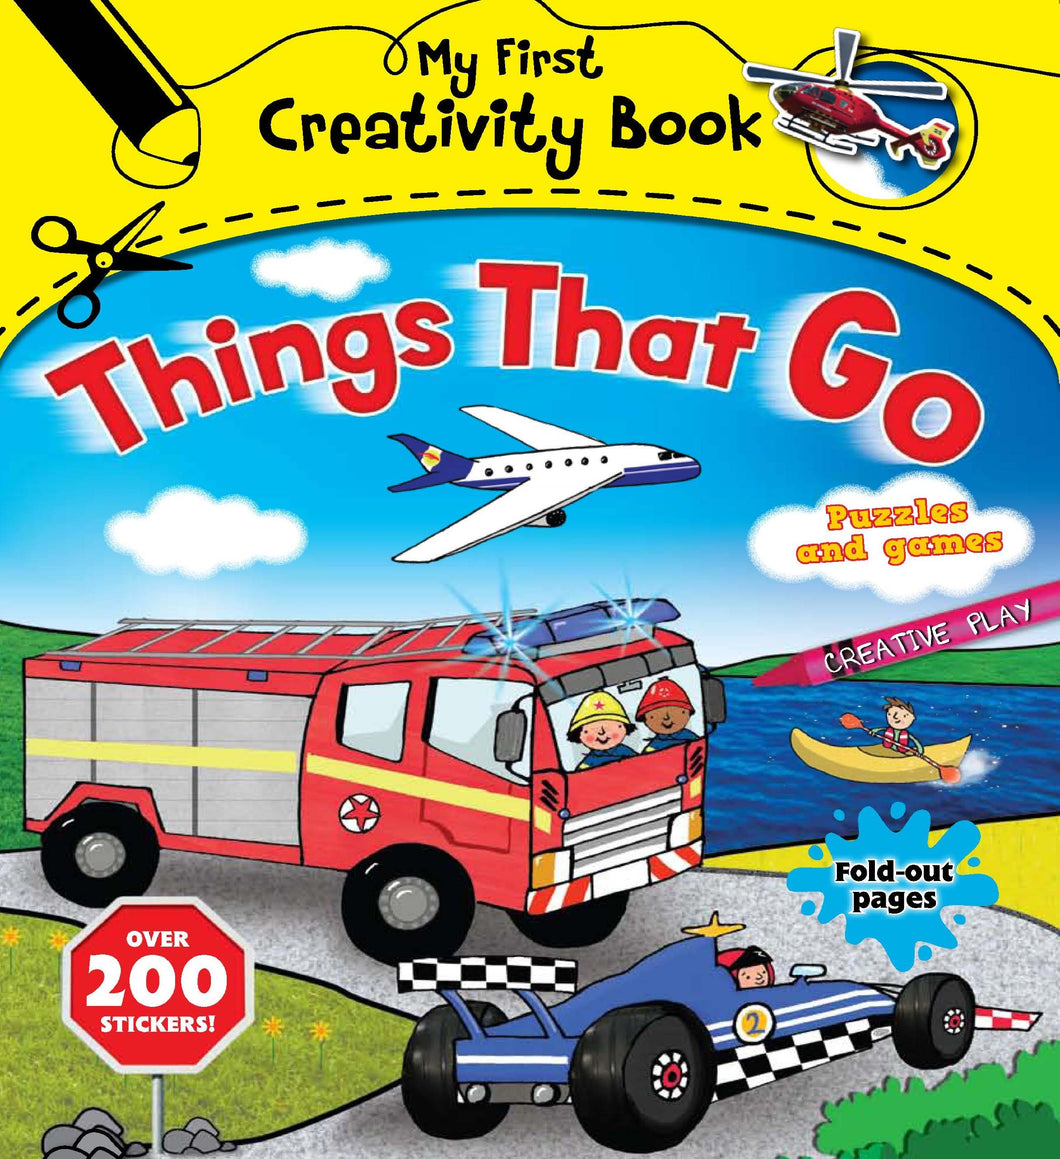 My First Creativity Book – Things That Go! - ONLINE SCHOOL BOOK FAIRS 